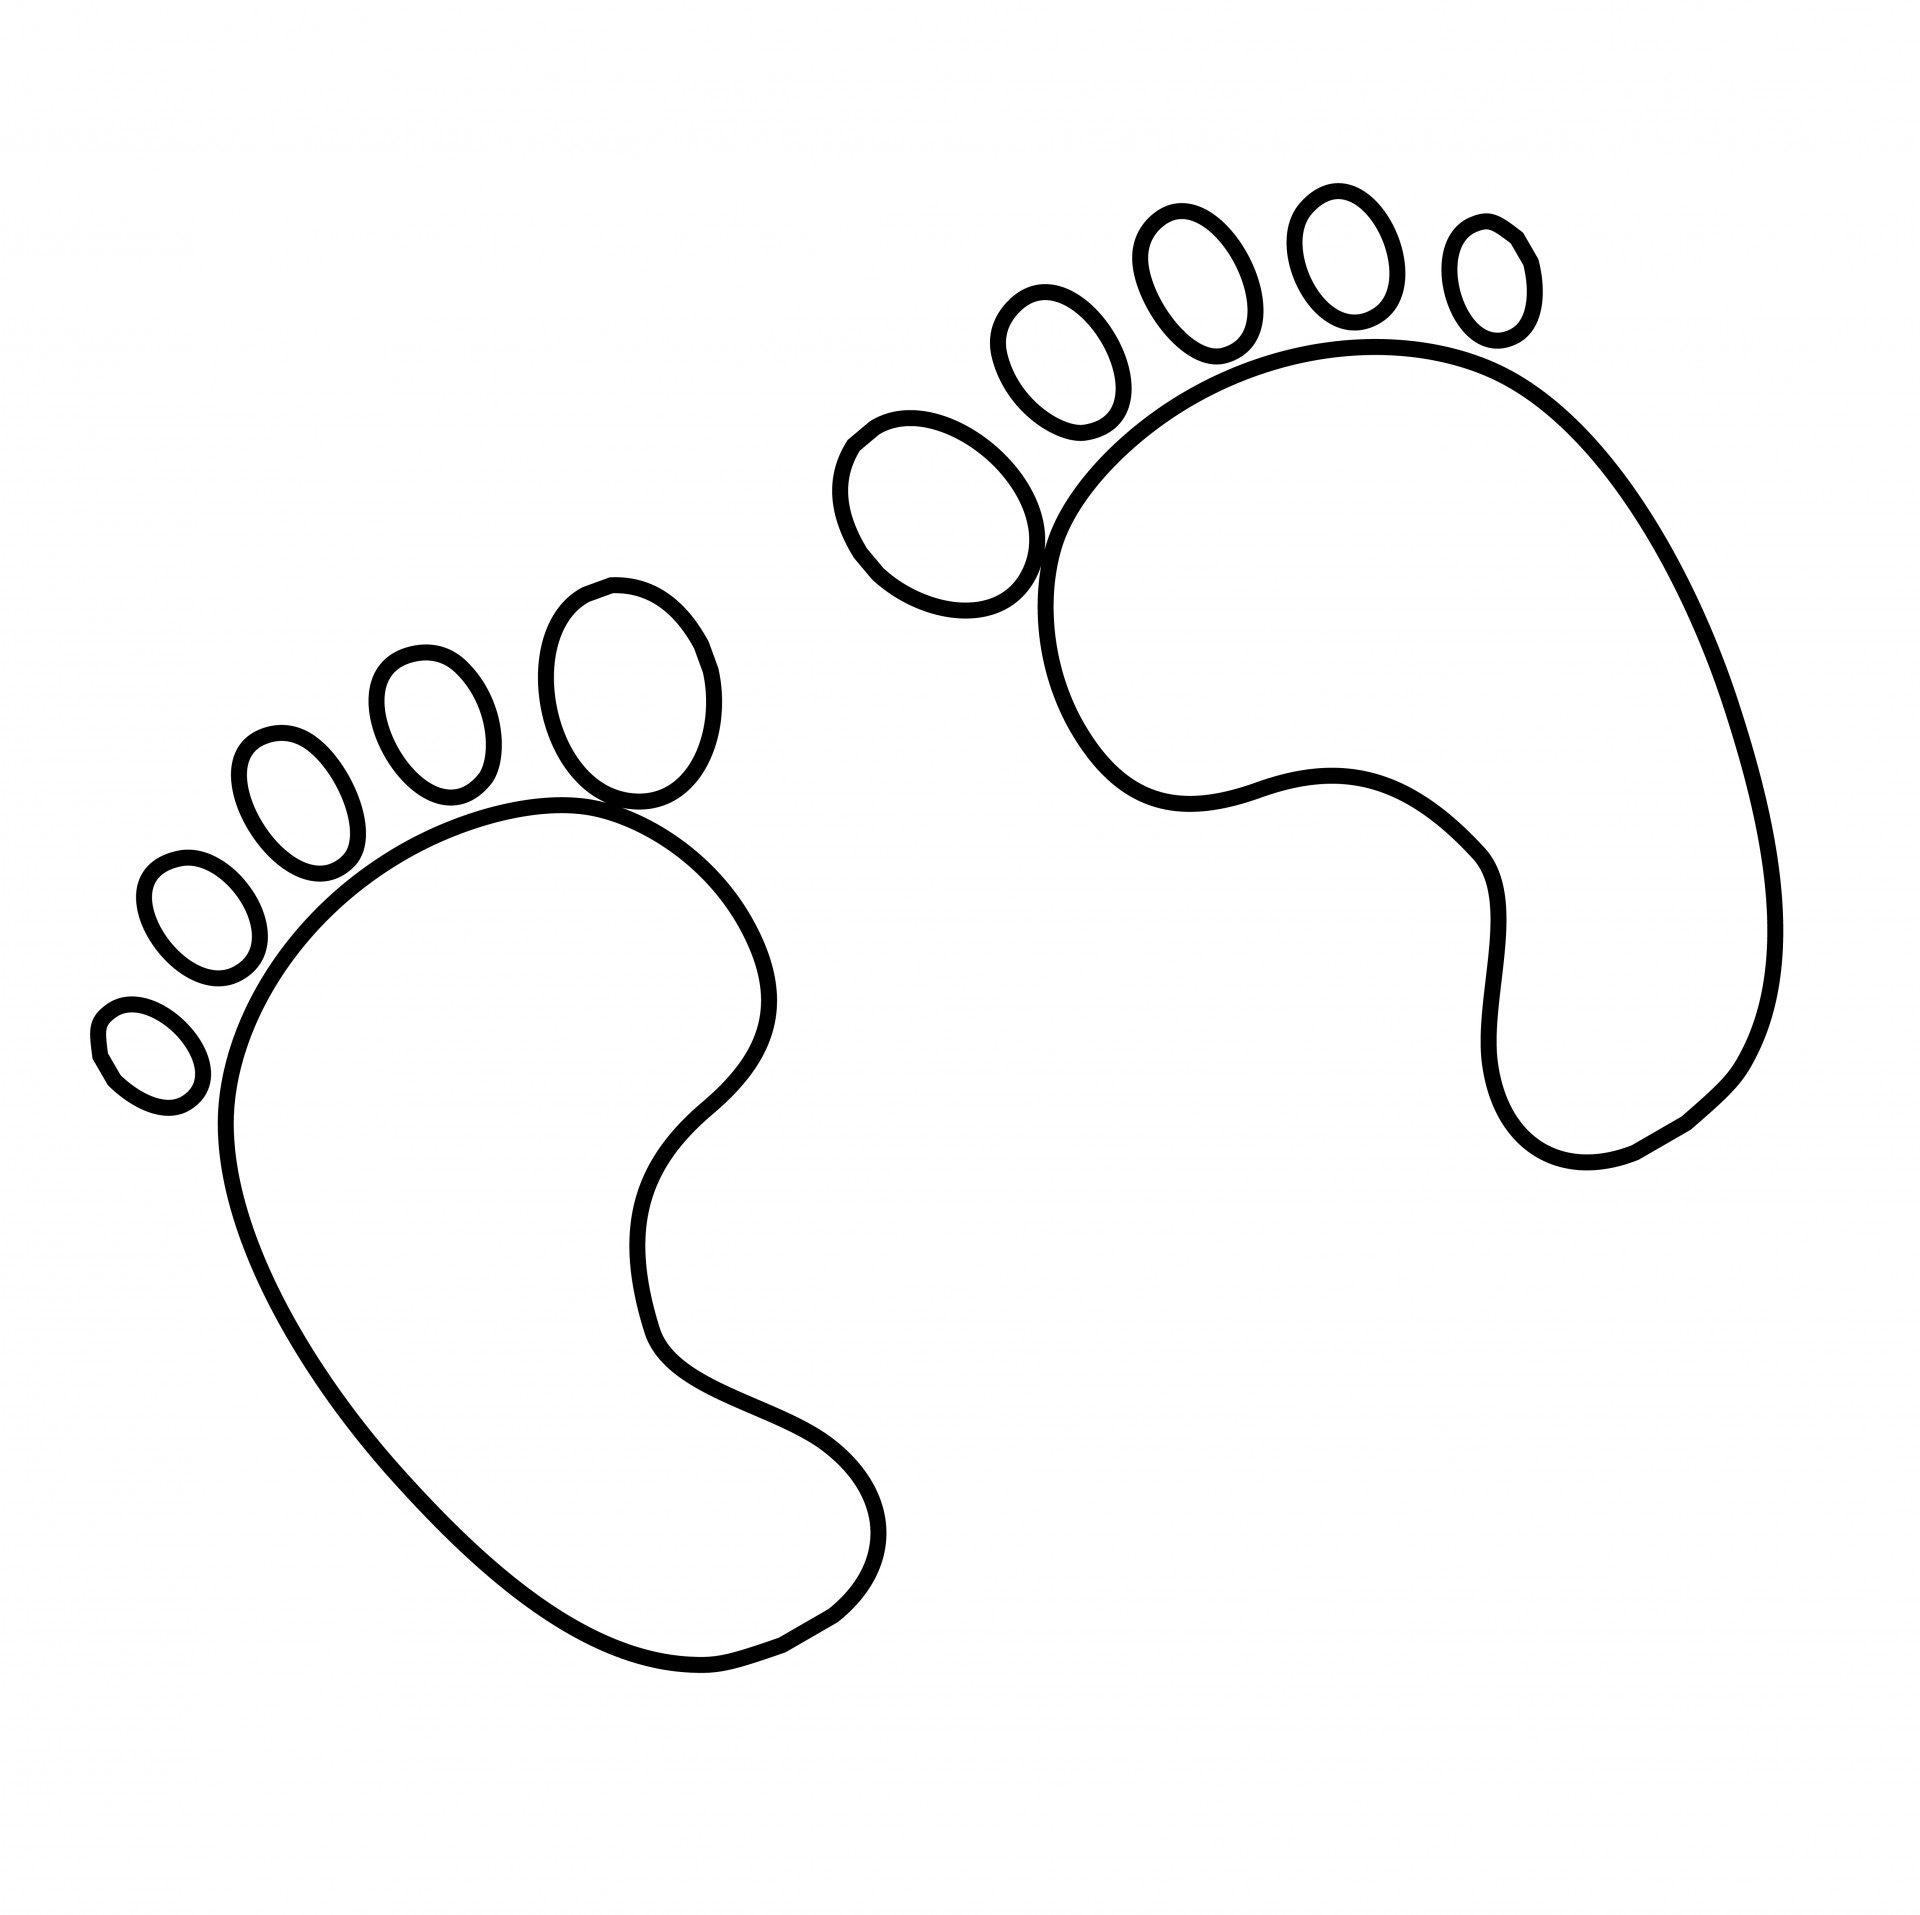 Footprints Outline Clipart Free Stock Photo - Public ...